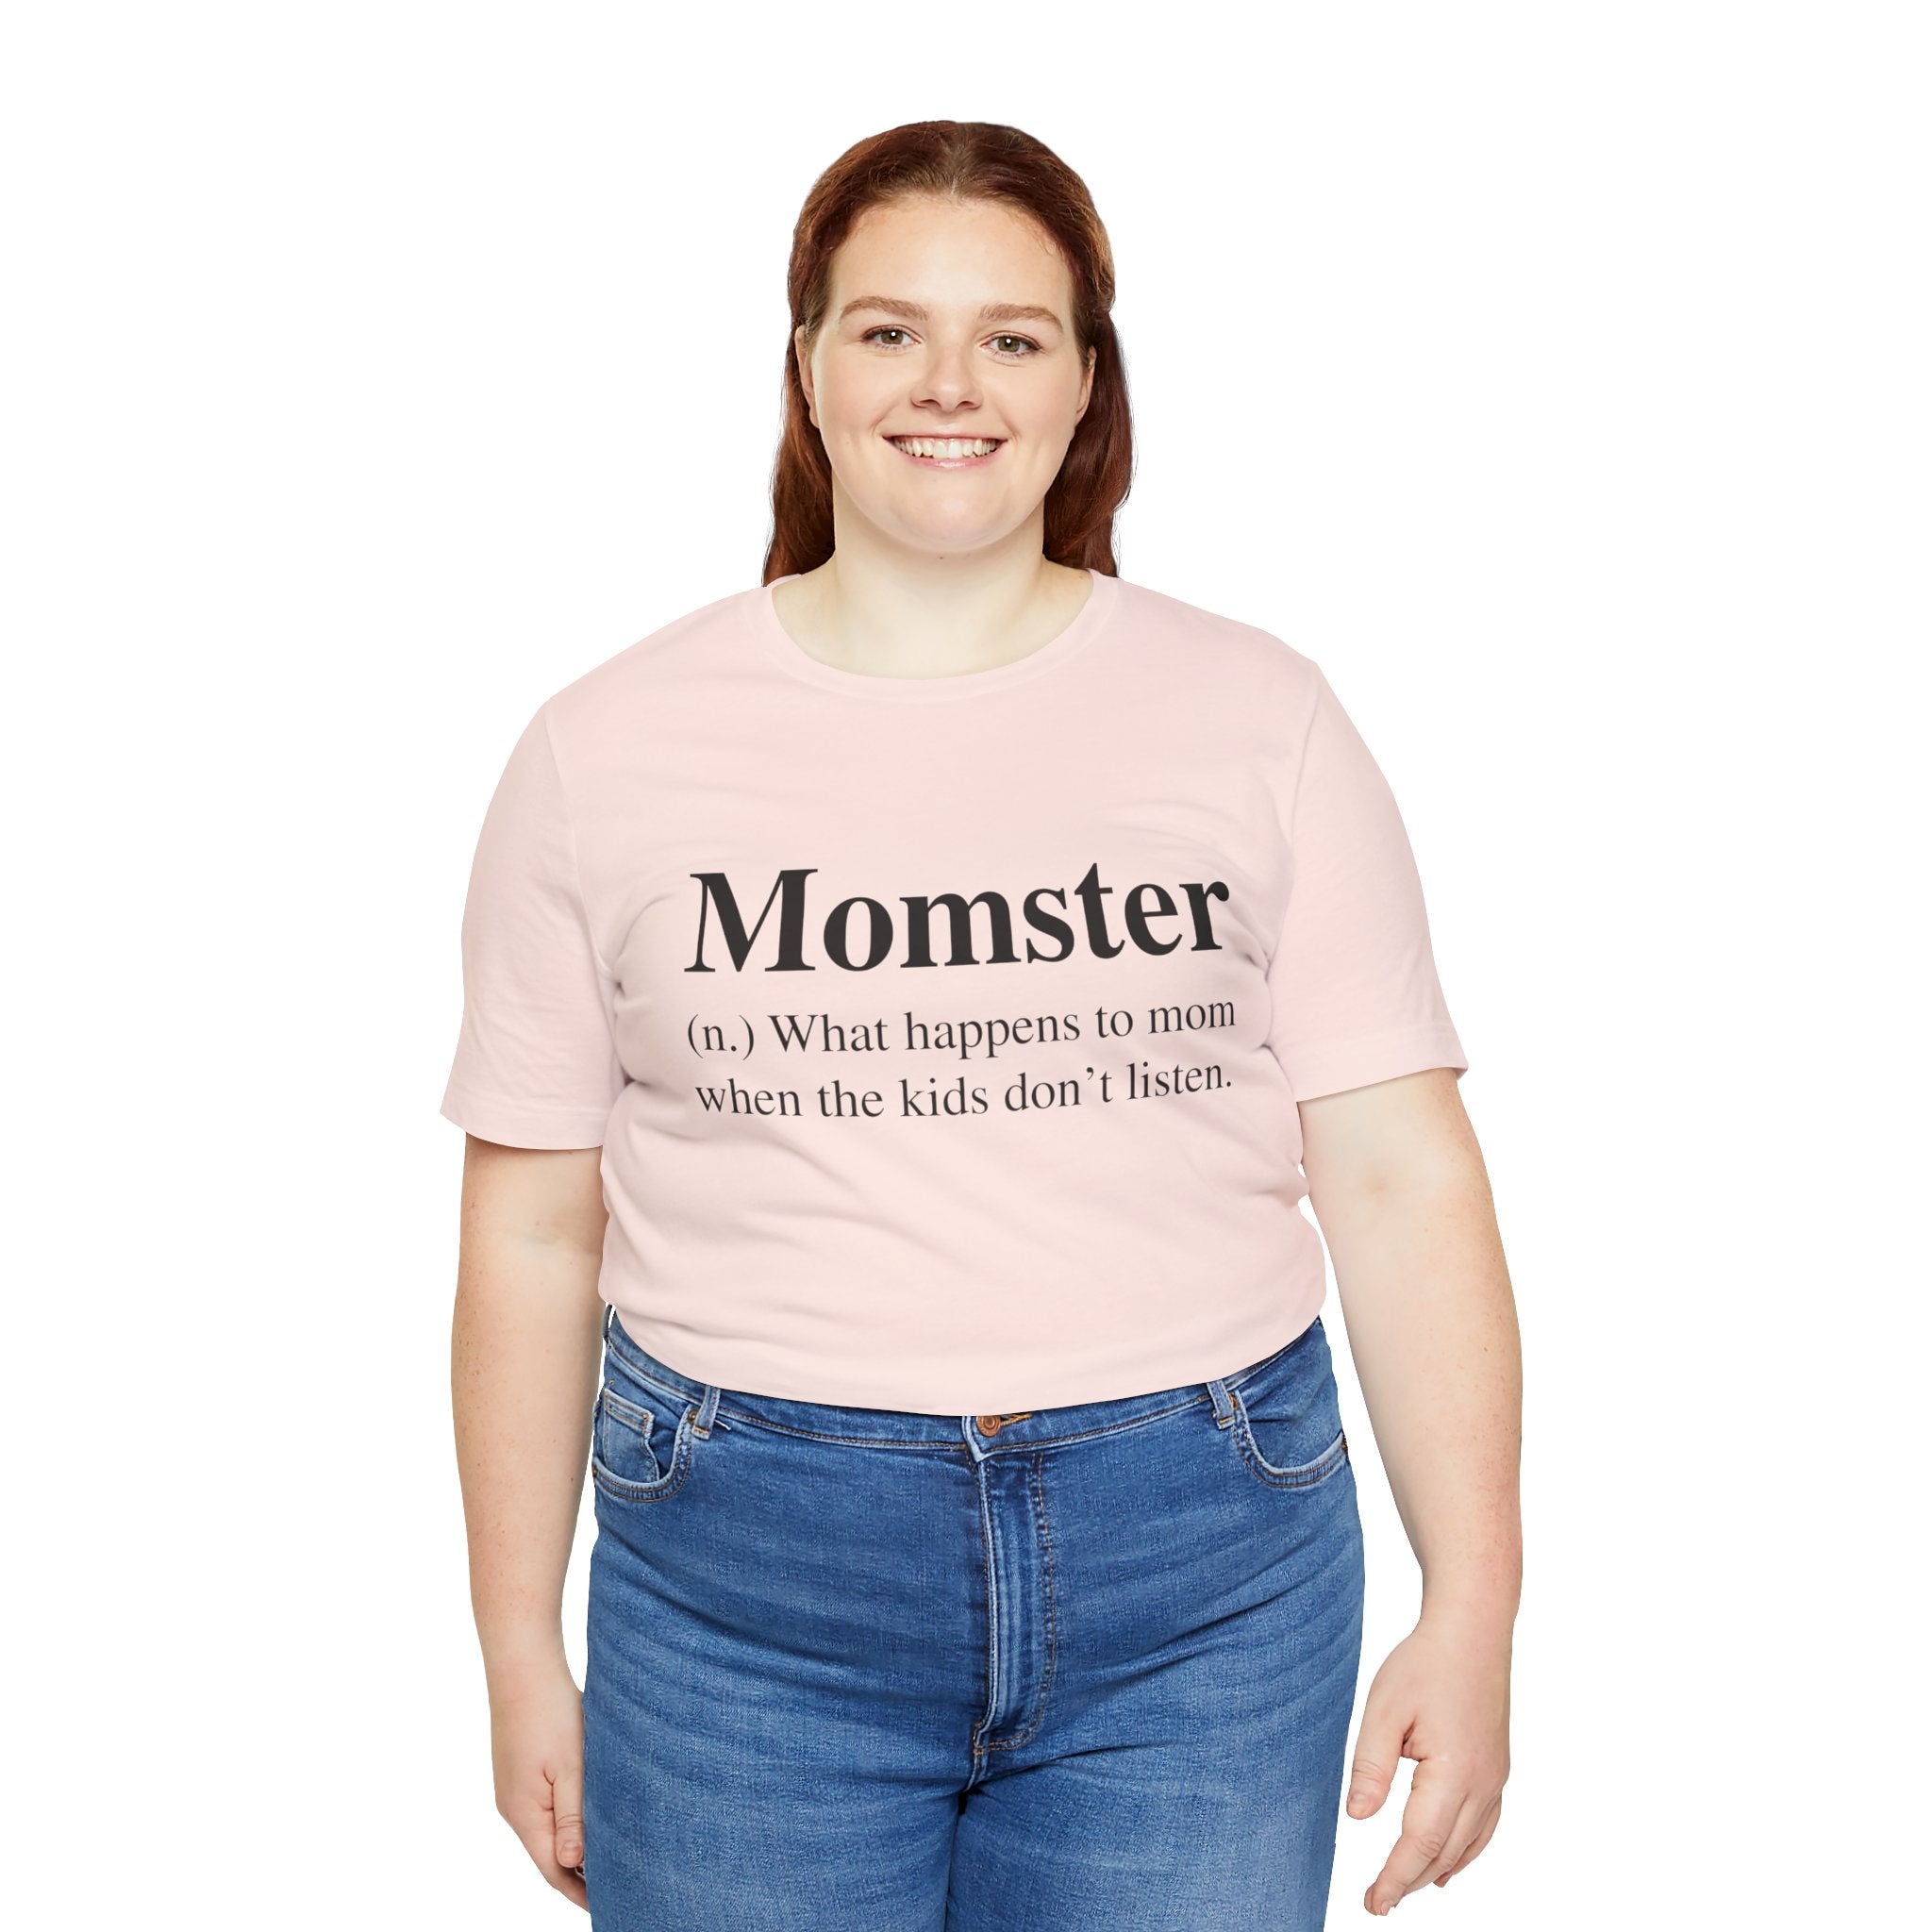 A woman in a Momster T-Shirt with the word "momster" and its humorous definition printed on it, paired with blue jeans, smiling at the camera.